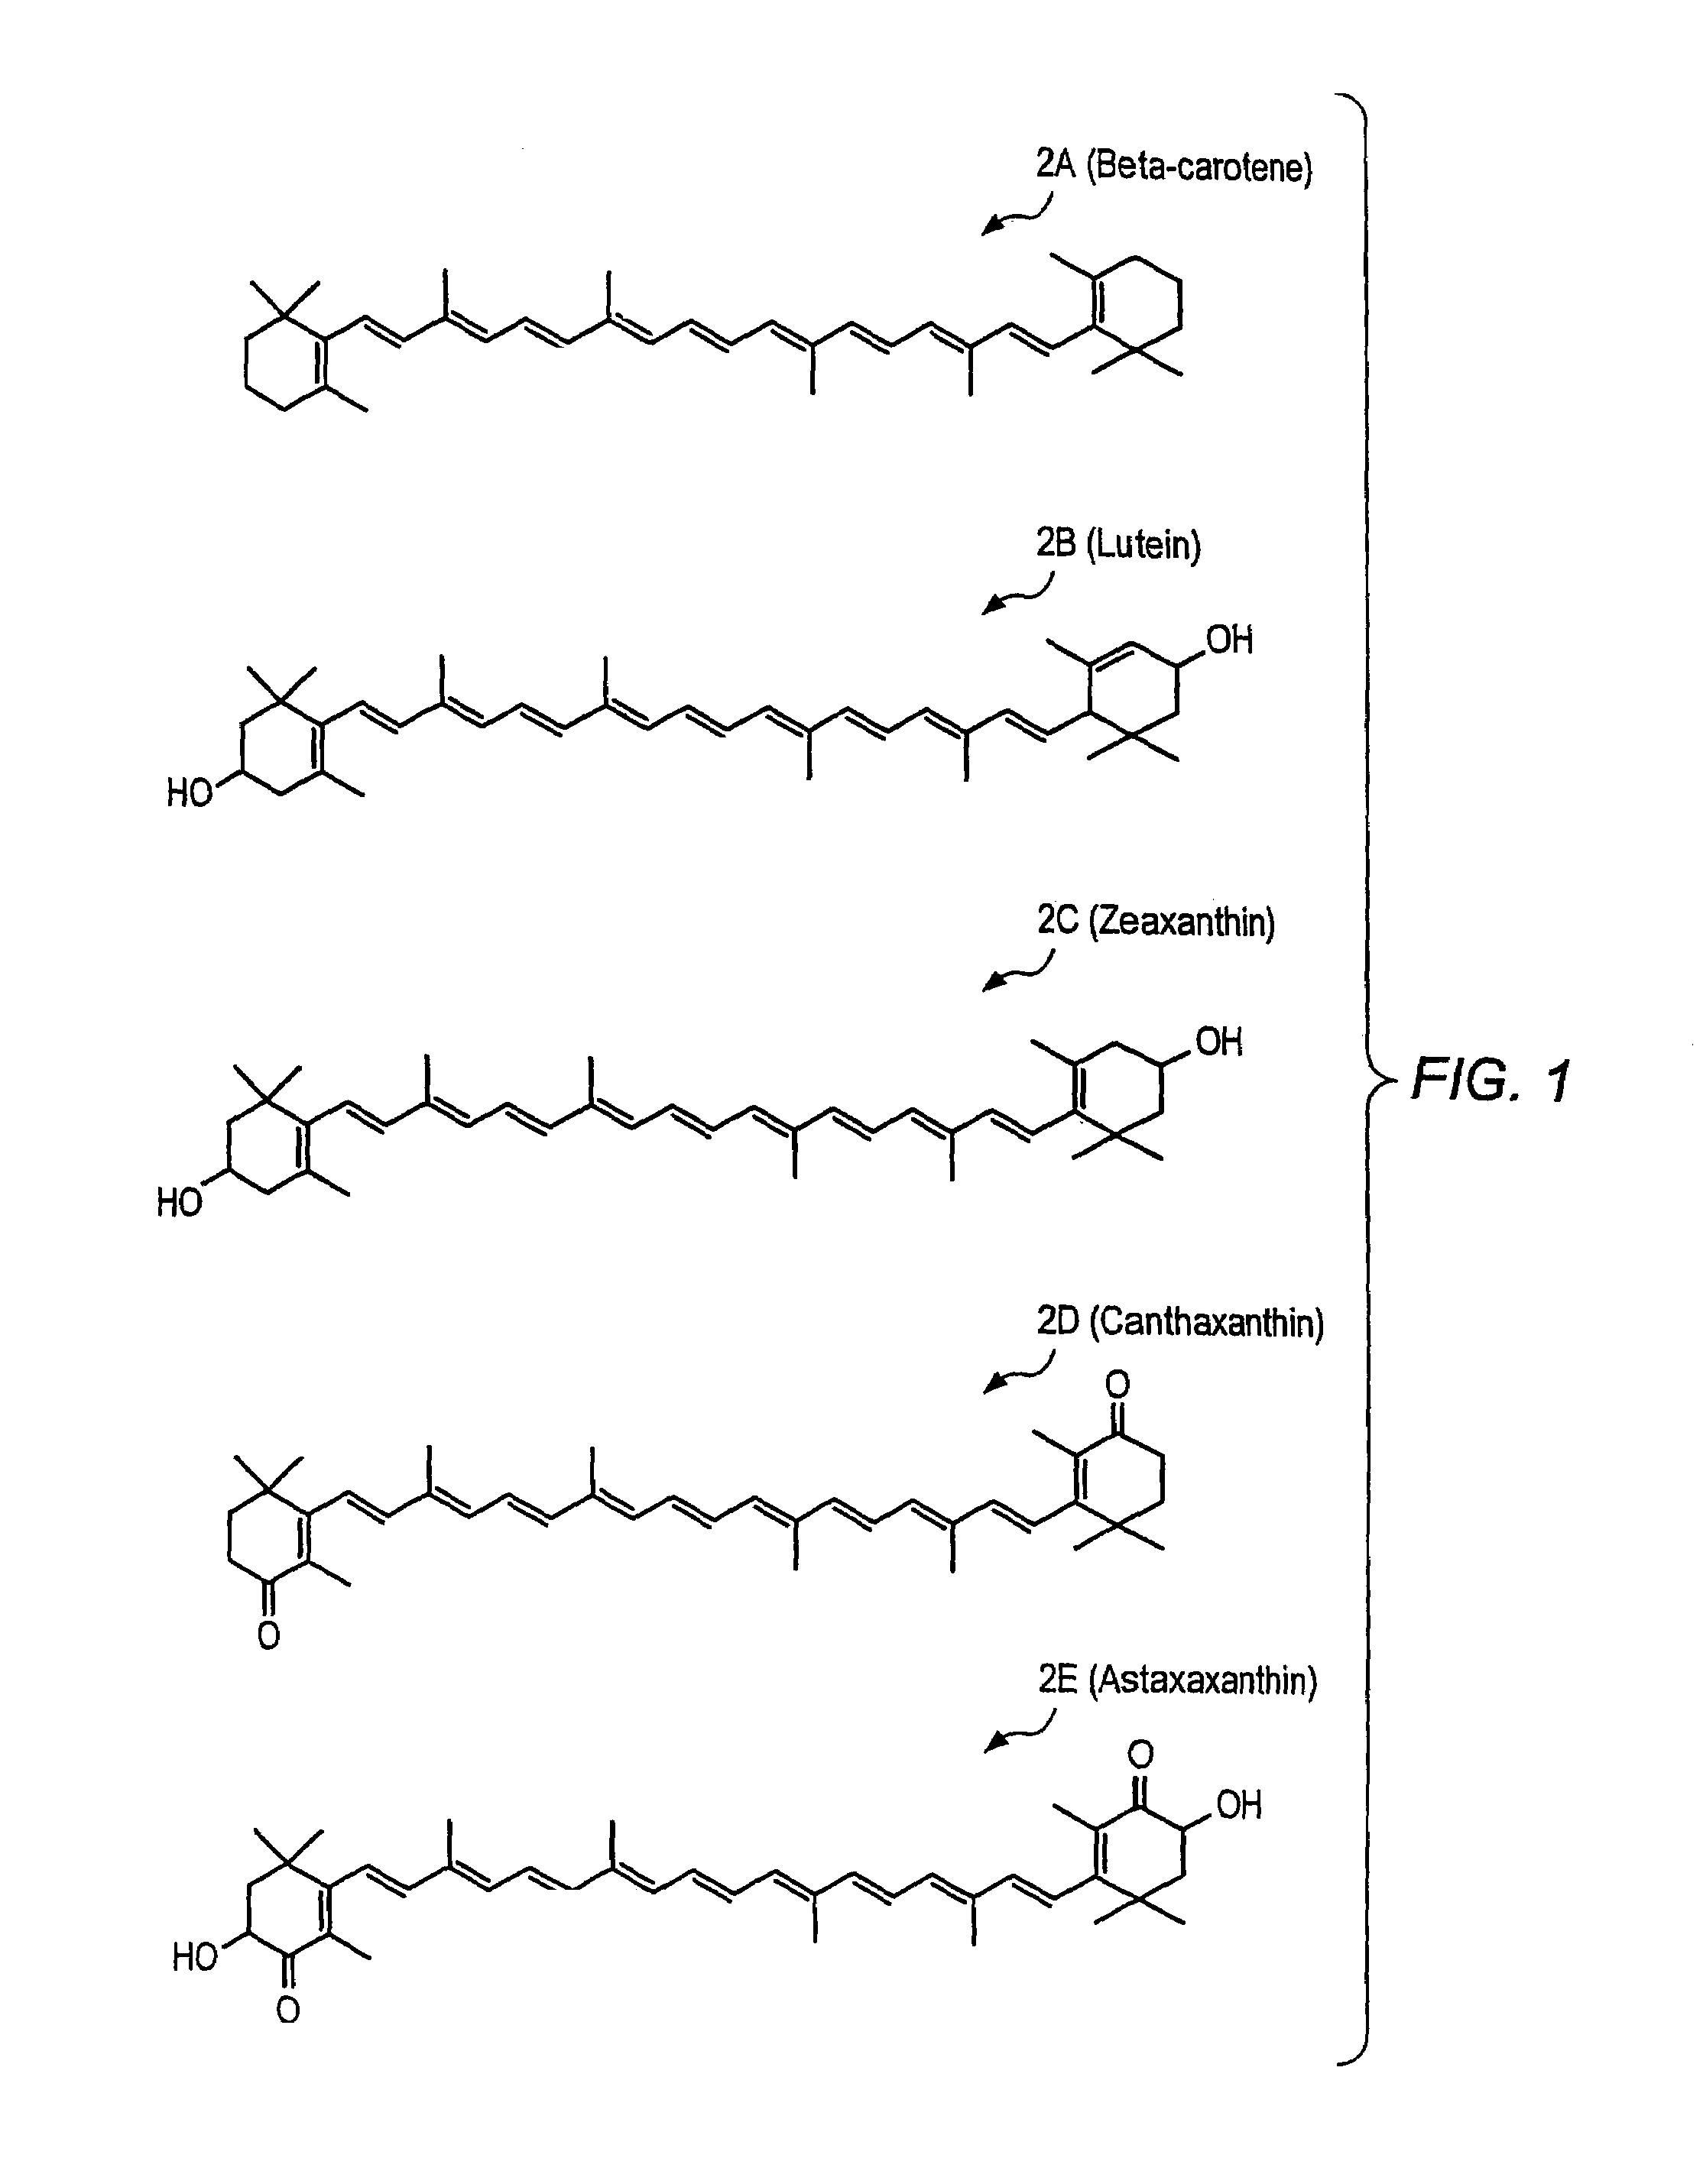 Carotenoid ether analogs or derivatives for the inhibition and amelioration of disease